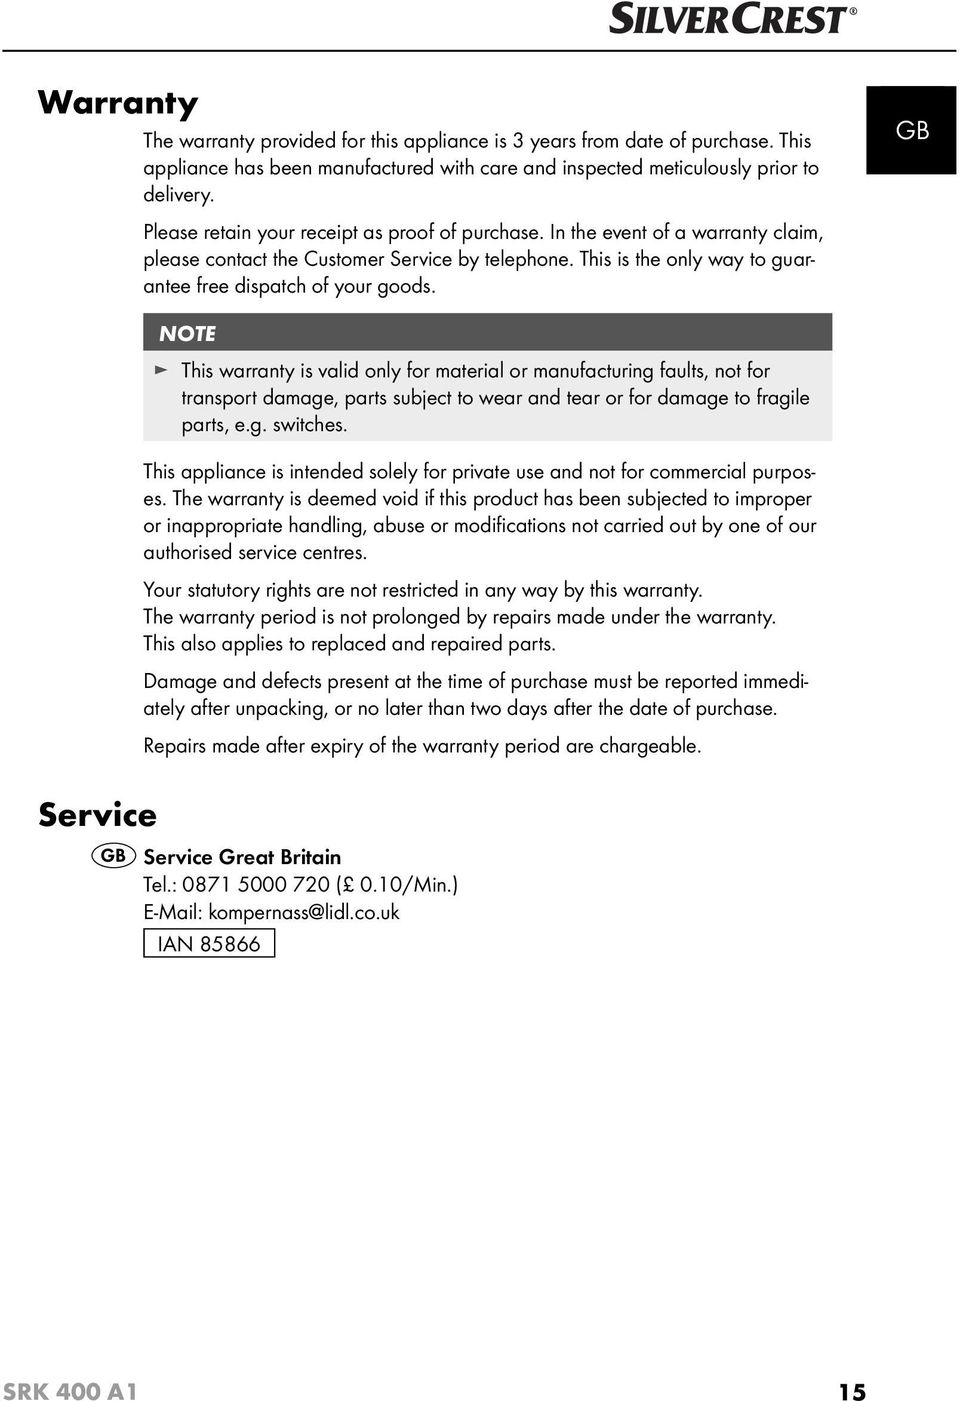 GB Service NOTE This warranty is valid only for material or manufacturing faults, not for transport damage, parts subject to wear and tear or for damage to fragile parts, e.g. switches.